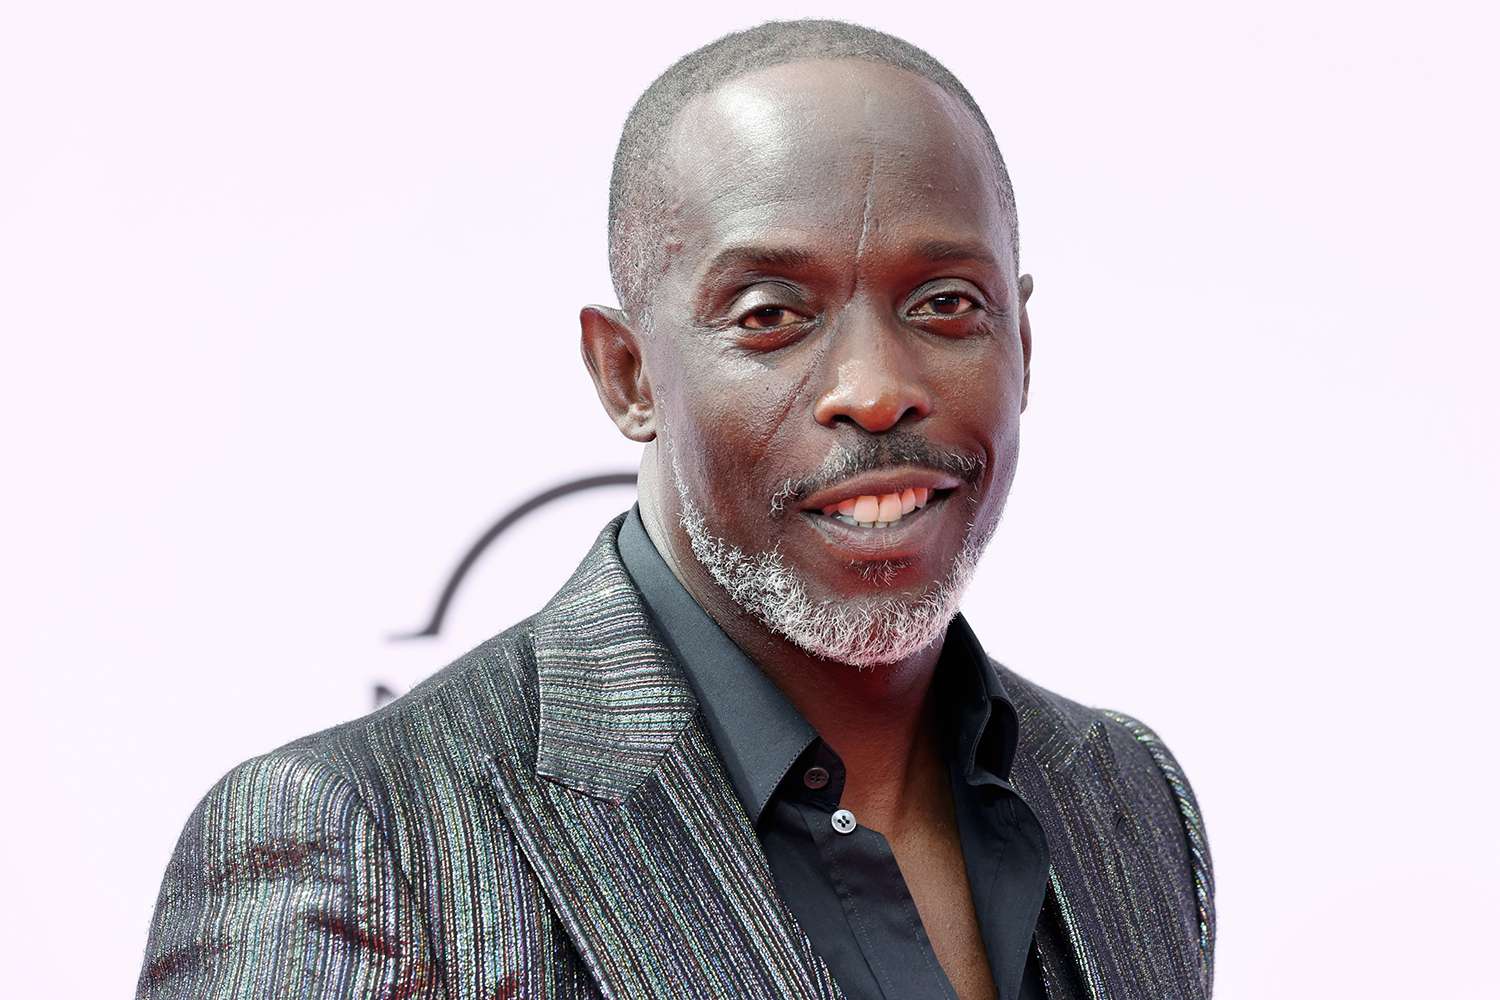 Four Men Arrested for Operating Drug Trafficking Operation in Connection to Overdose Death of “The Wire” Actor Michael K. Williams